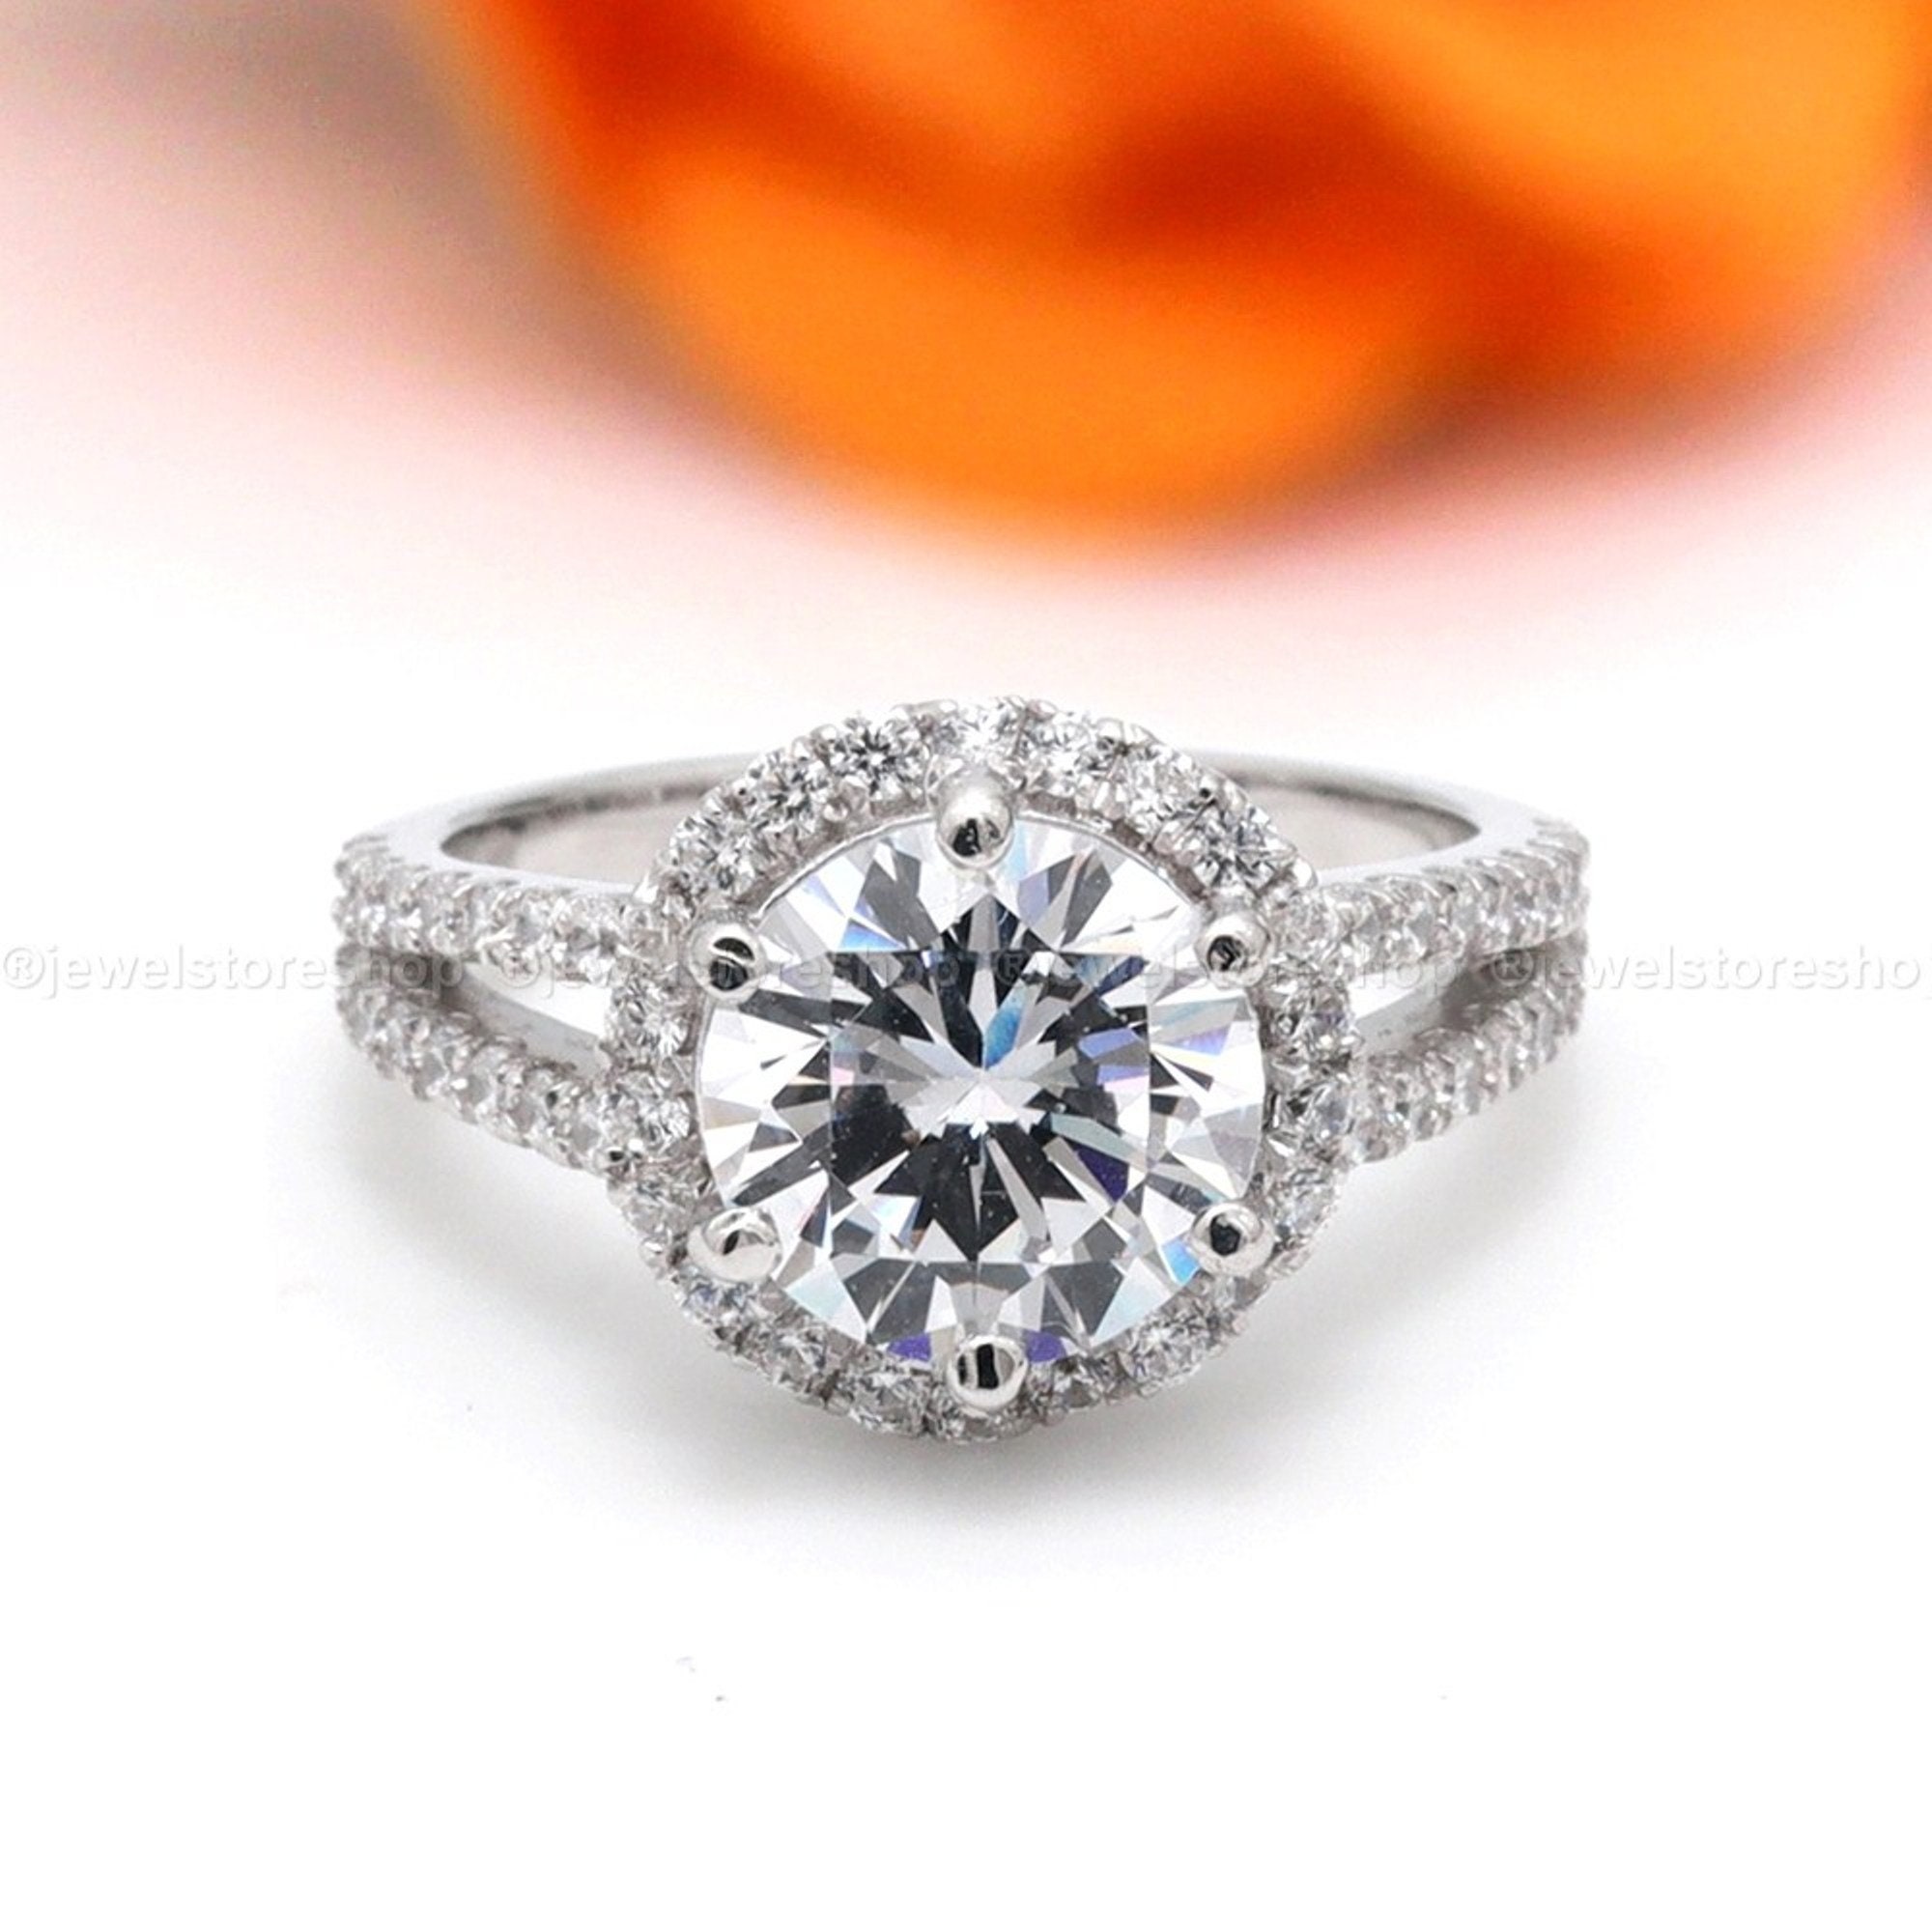 Cathedral Split Shank Pave Oval Diamond Engagement Ring GIA D Color VS1  0.85 Ct | eBay